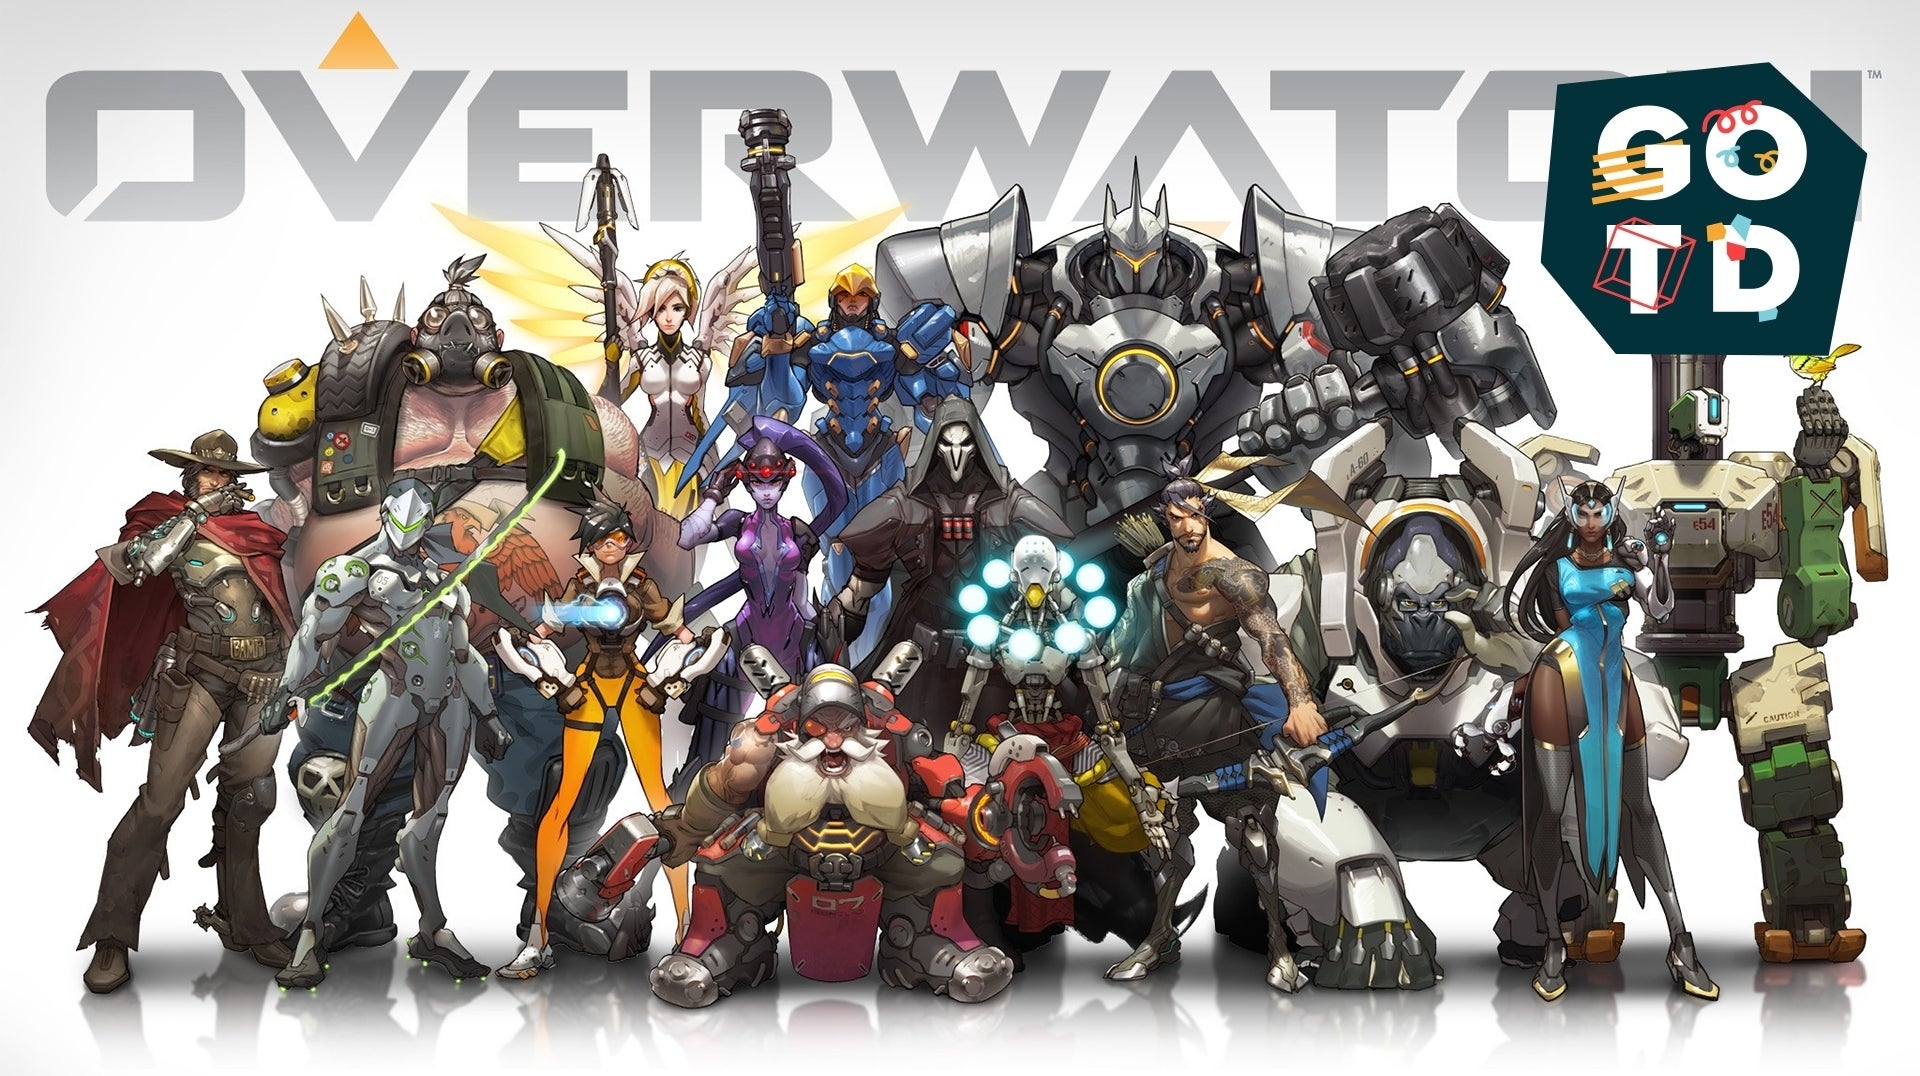 Image for Games of the Decade: Overwatch shows how fun lore can enrich a competitive shooter